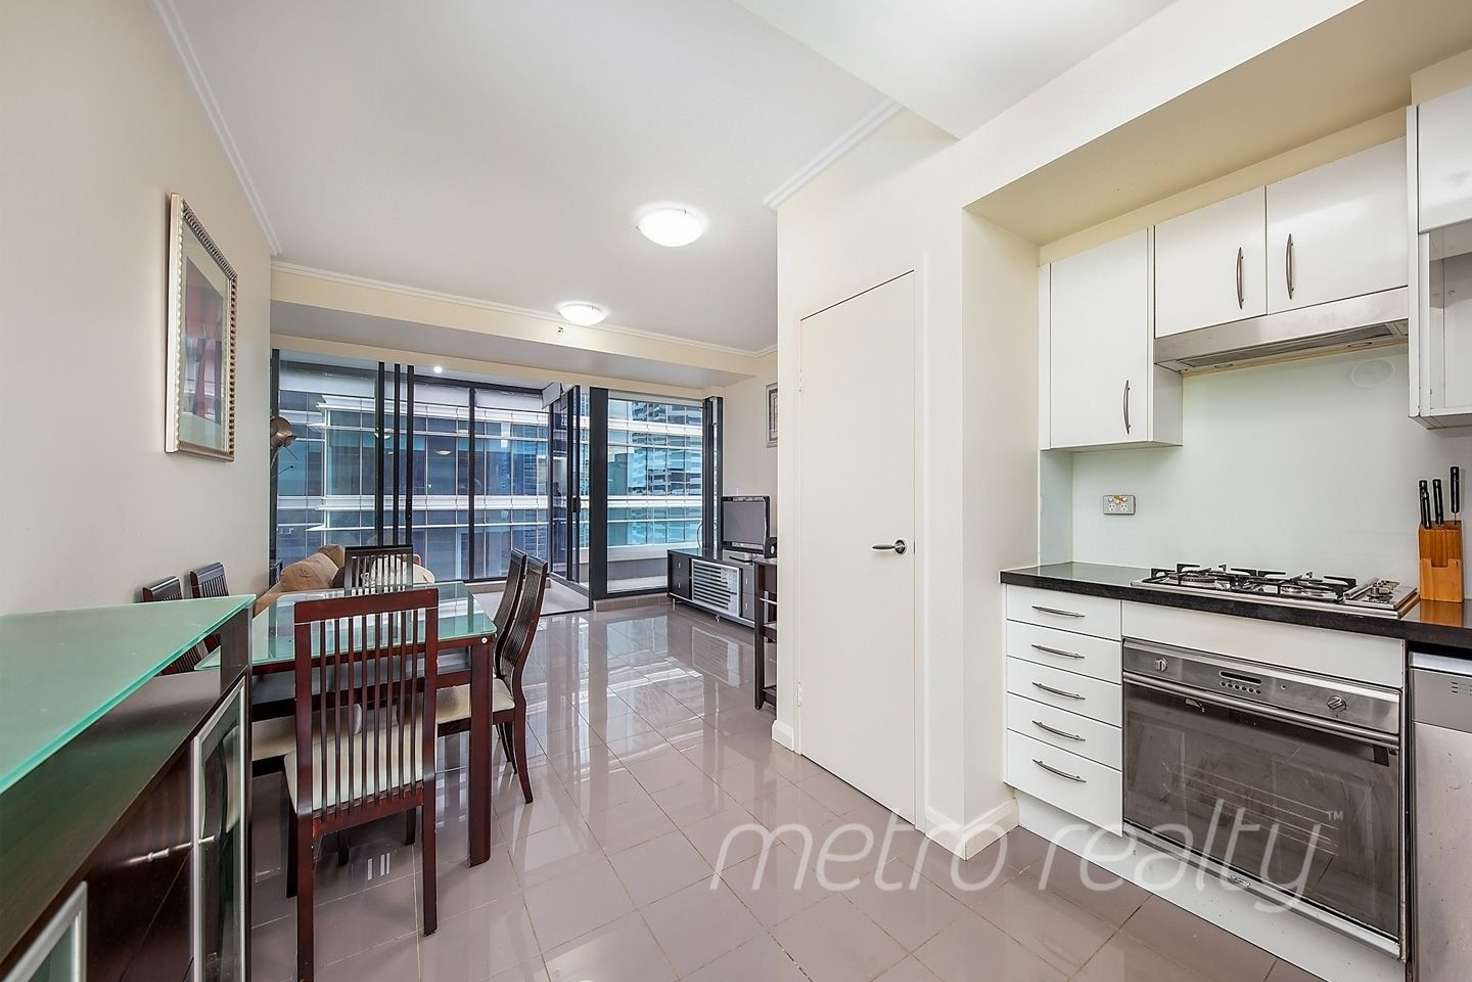 Main view of Homely apartment listing, 2804/91 Liverpool St, Sydney NSW 2000